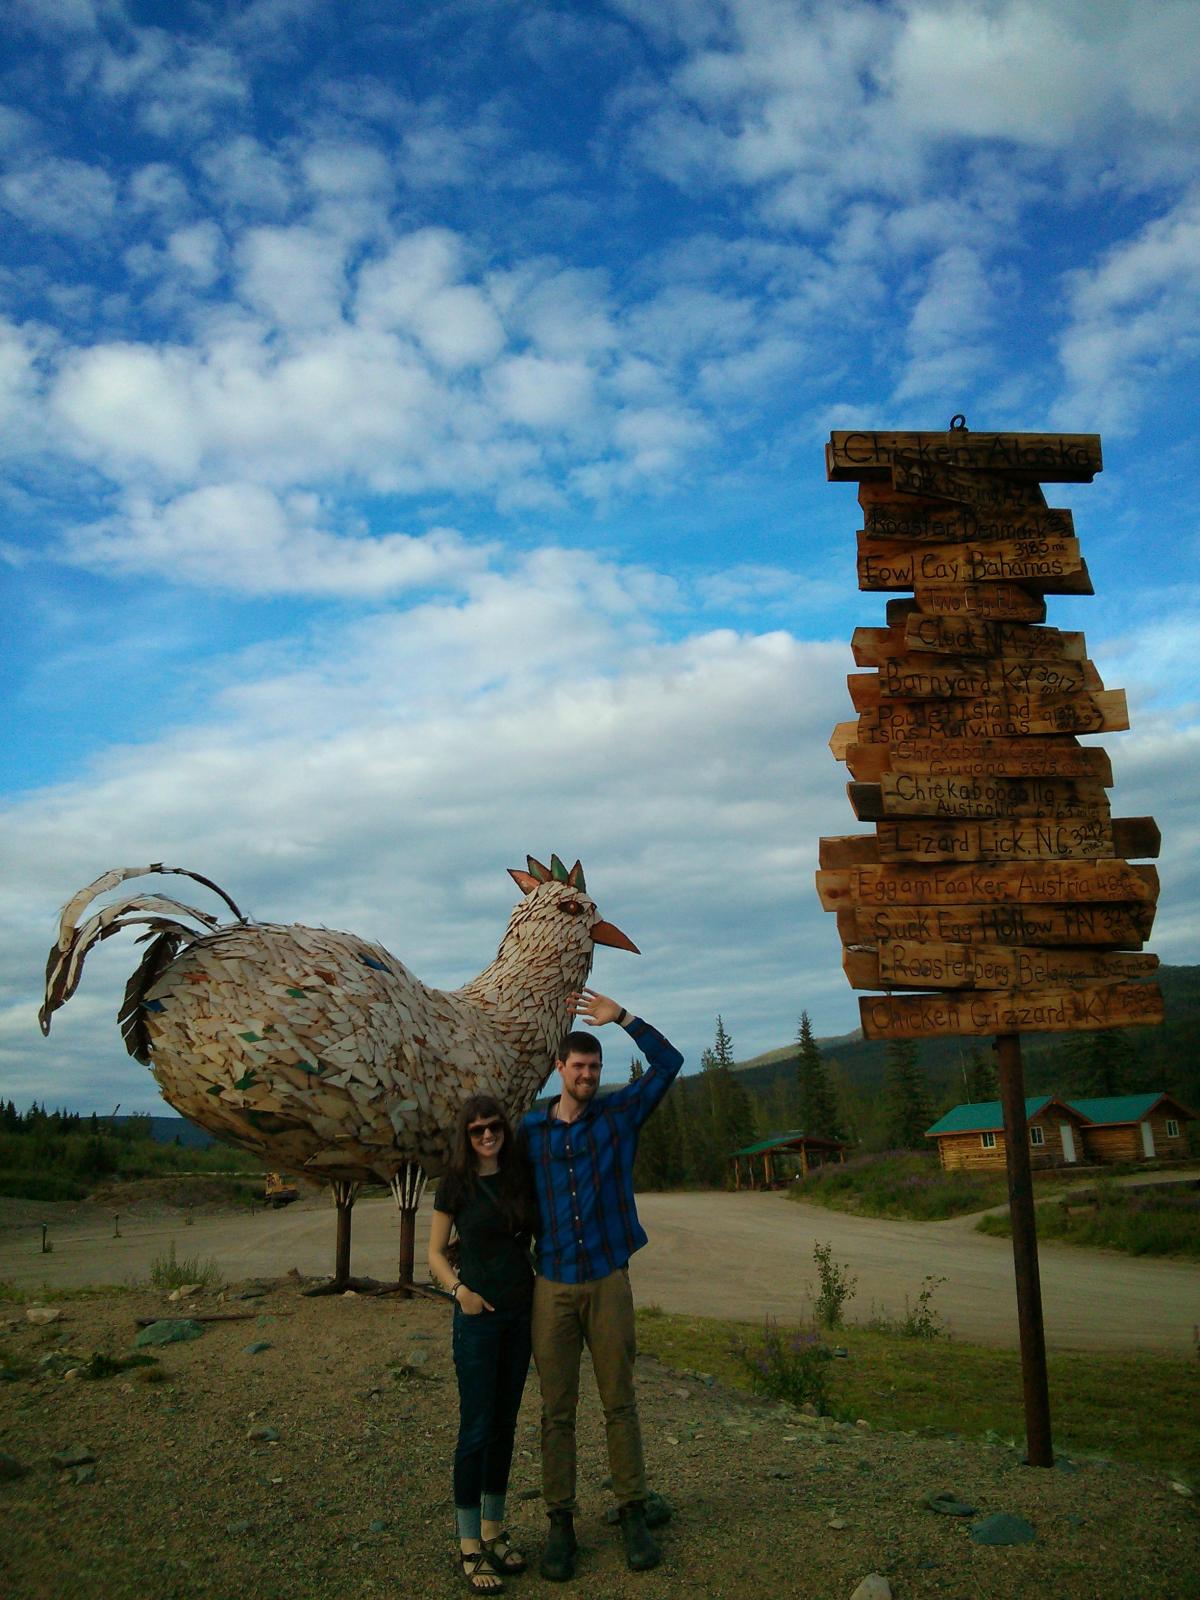 Ryan and his wife posing outside near a giant chicken sculpture